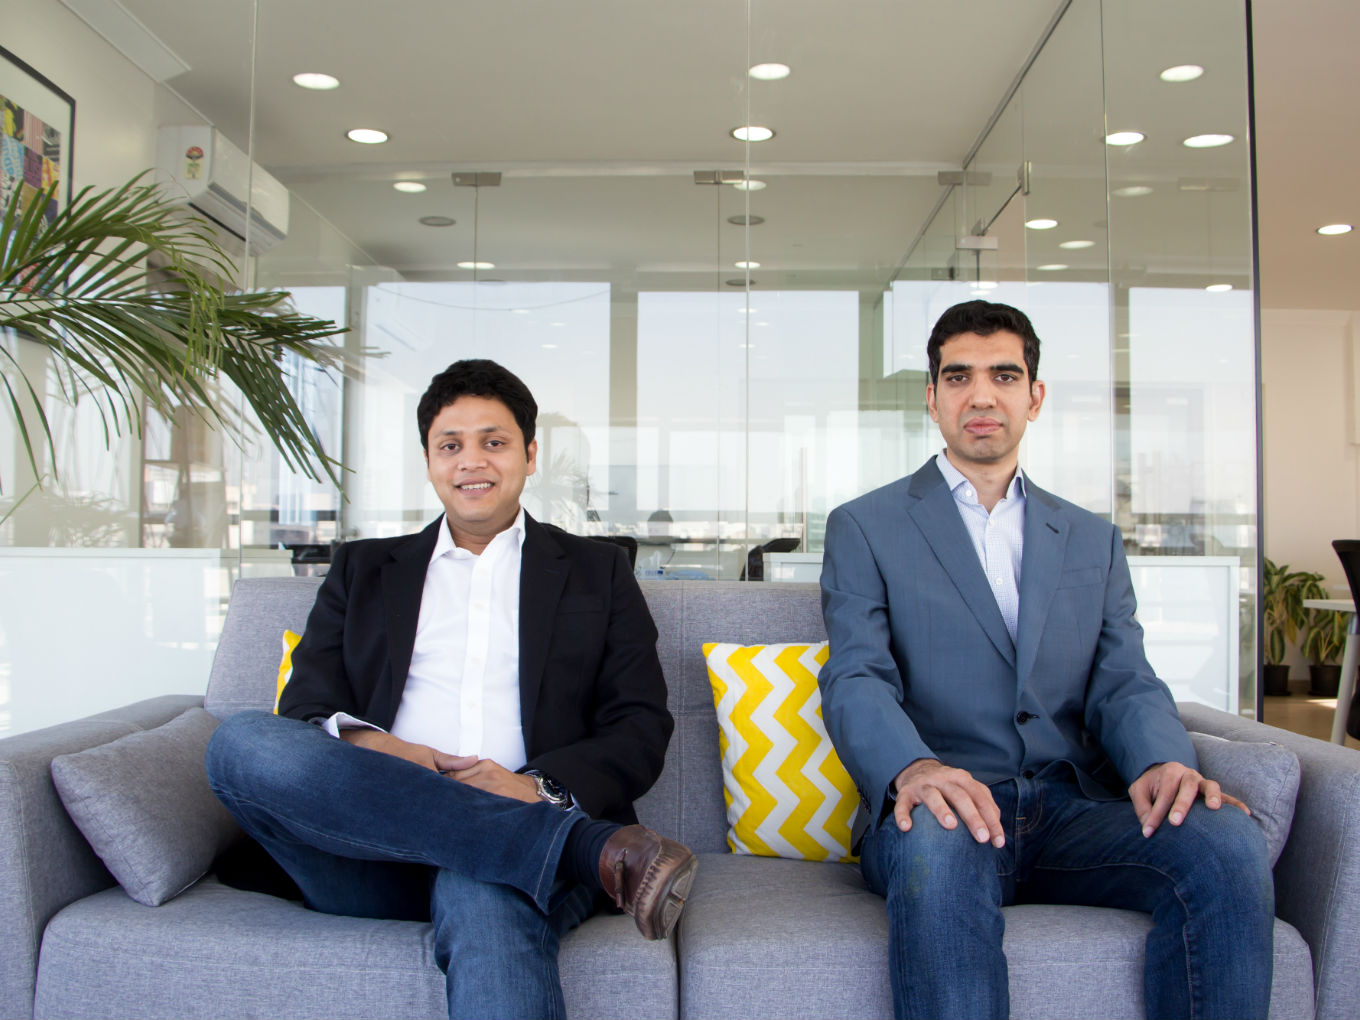 SME lending startup Drip Capital has raised $25 Mn in series B funding round led by Accel Partners and existing investors